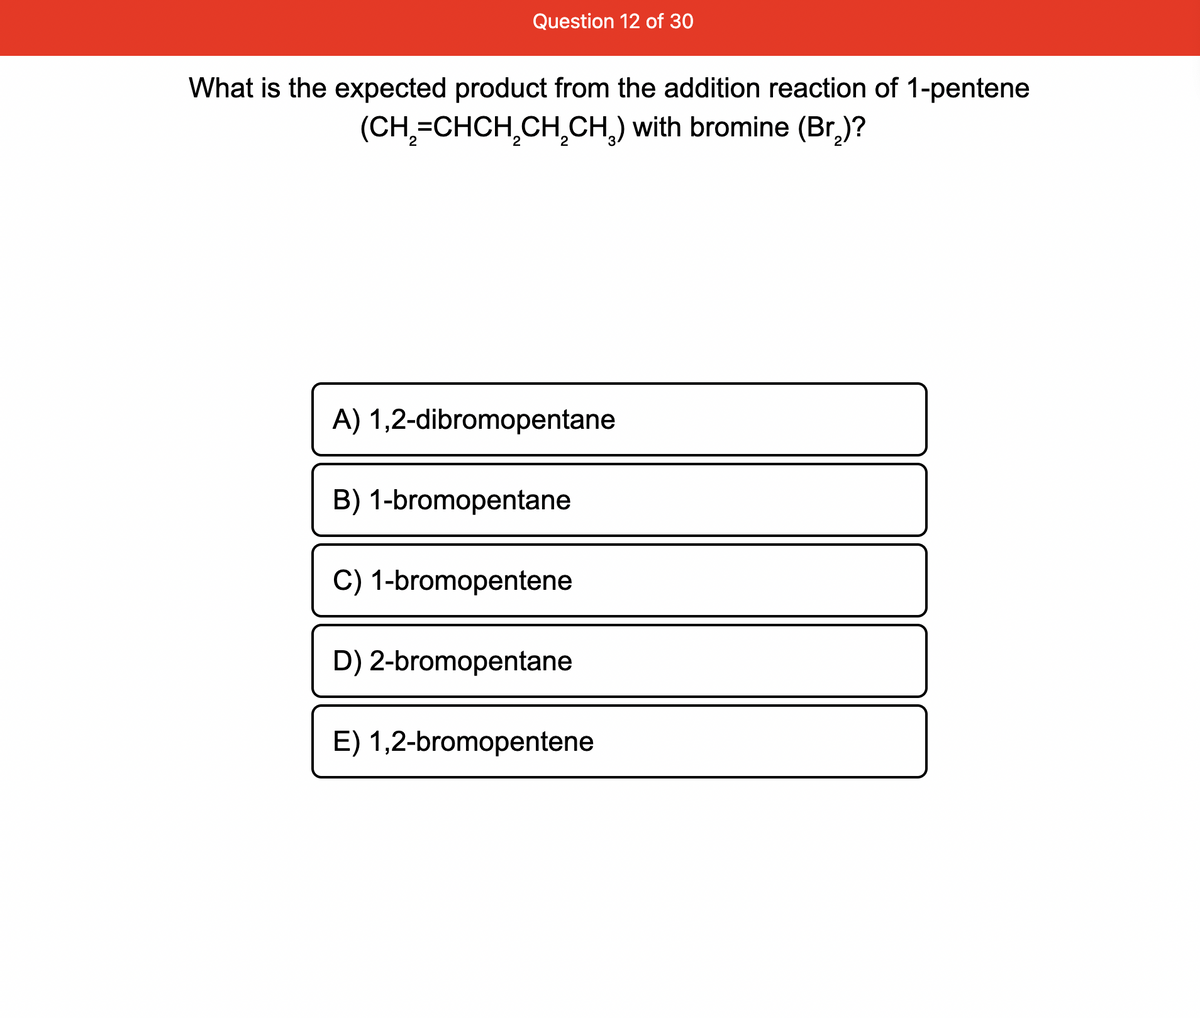 Question 12 of 30
What is the expected product from the addition reaction of 1-pentene
(CH₂=CHCH₂CH₂CH₂) with bromine (Br₂)?
A) 1,2-dibromopentane
B) 1-bromopentane
C) 1-bromopentene
D) 2-bromopentane
E) 1,2-bromopentene